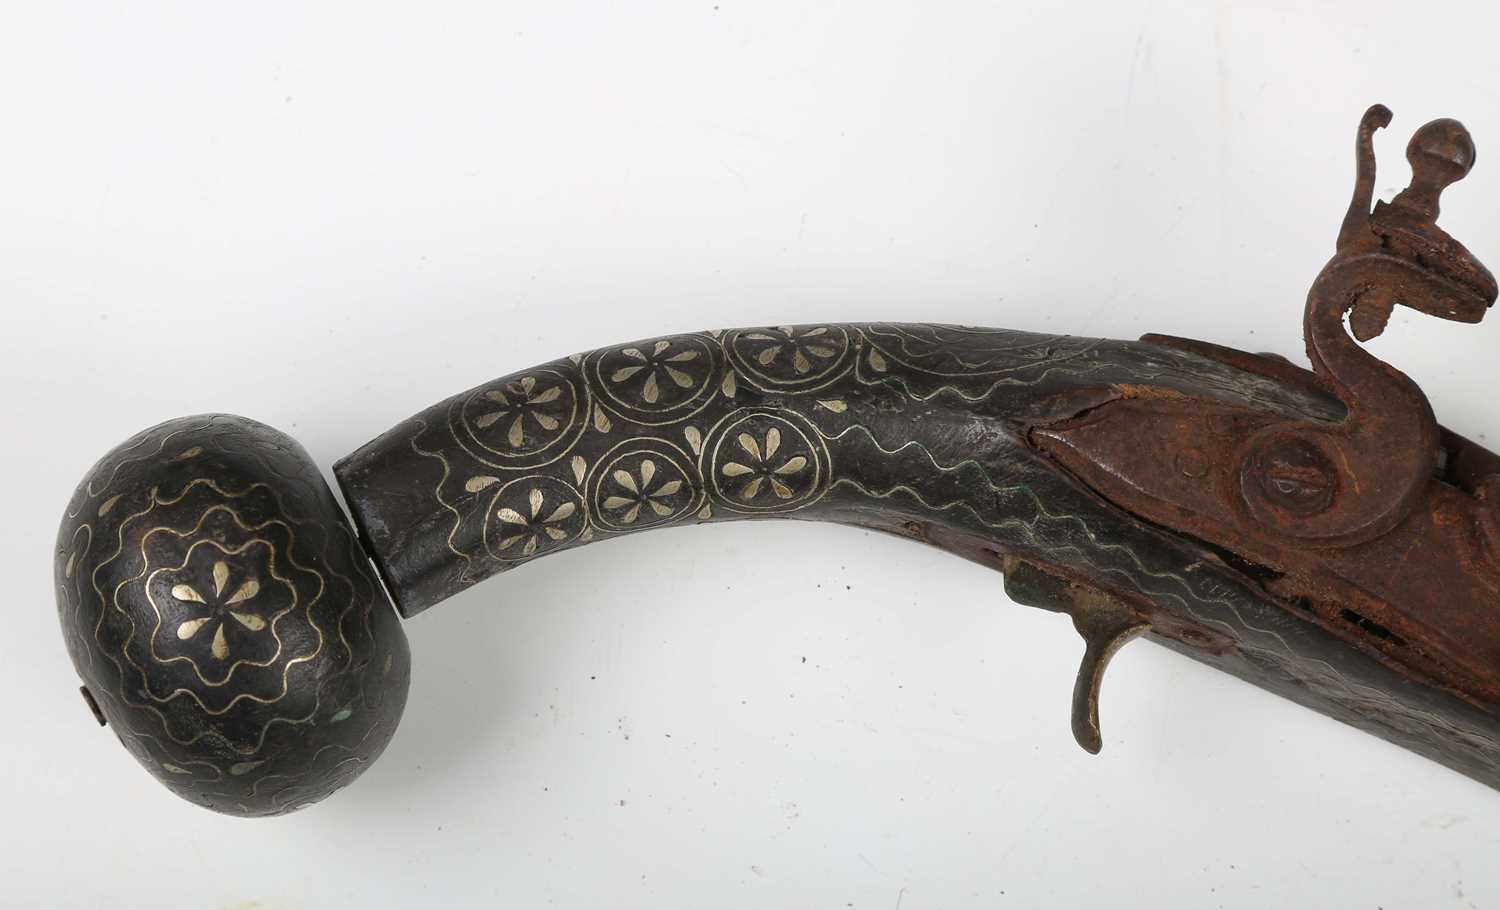 A pair of 18th century and later Middle Eastern flintlock pistols with linear-sighted round barrels, - Image 2 of 20